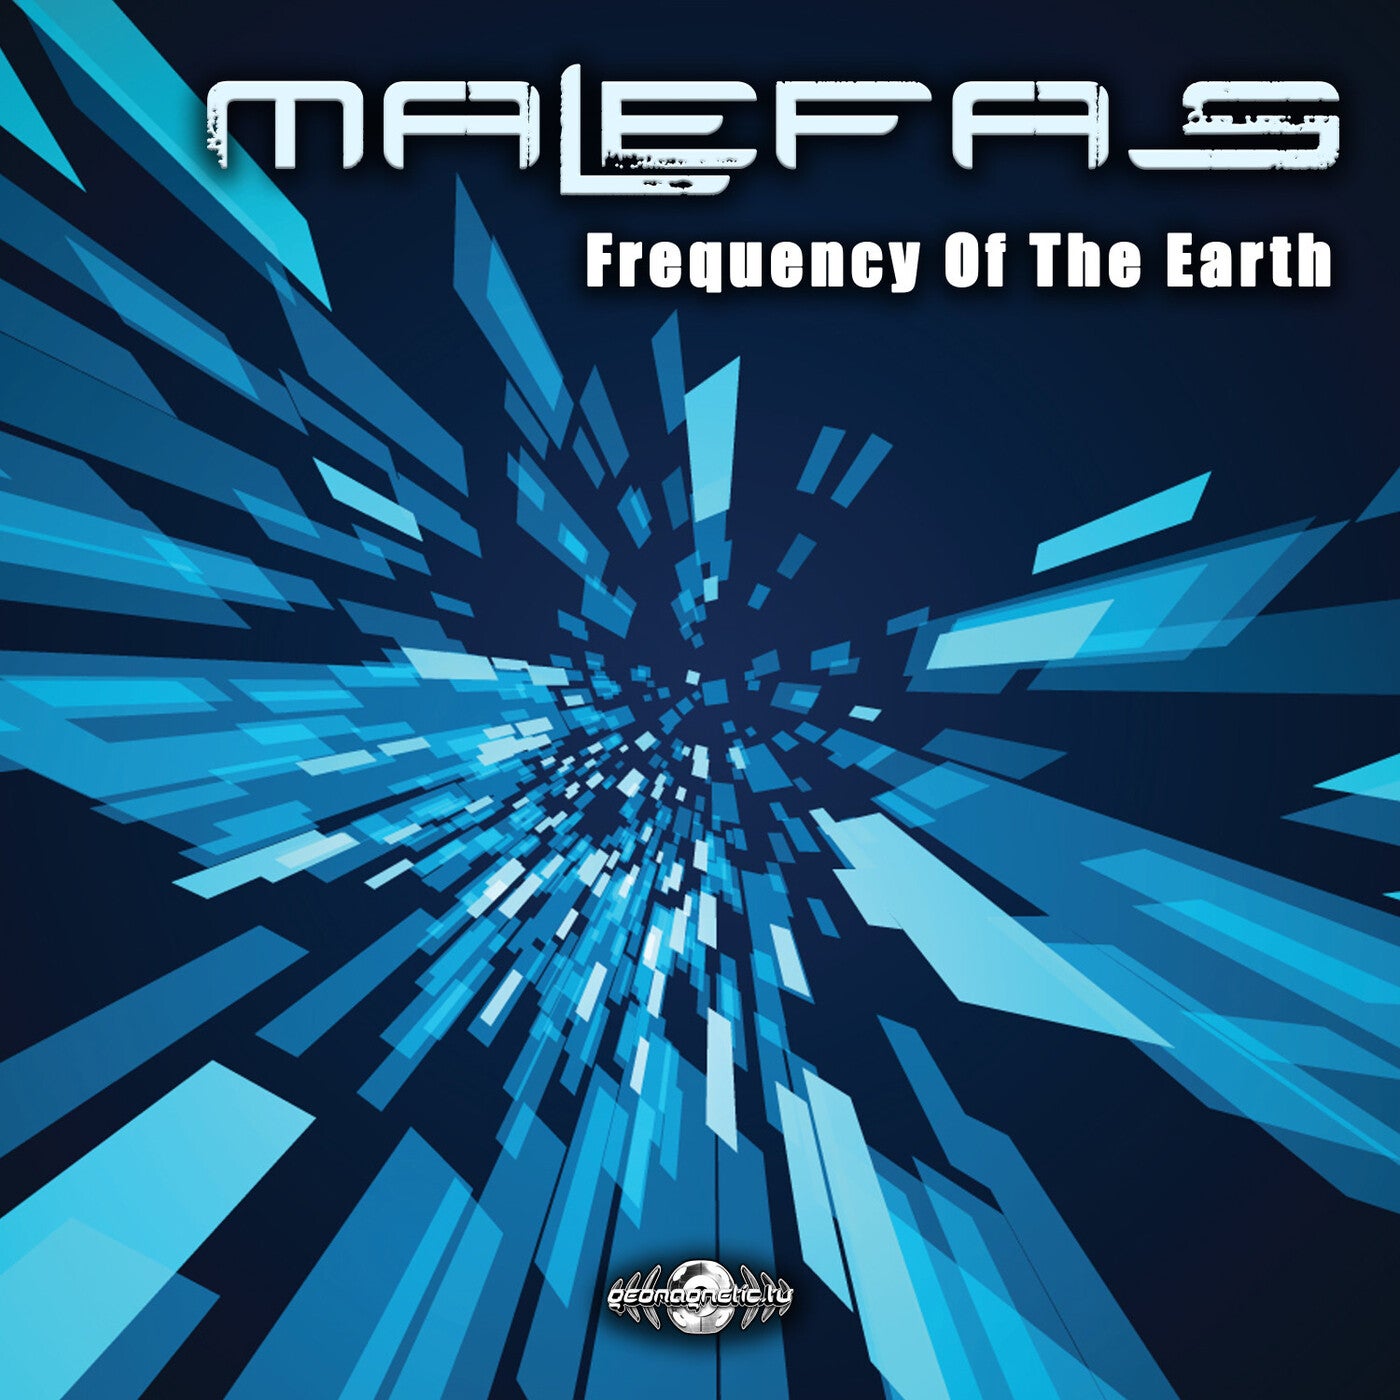 Frequency of the Earth